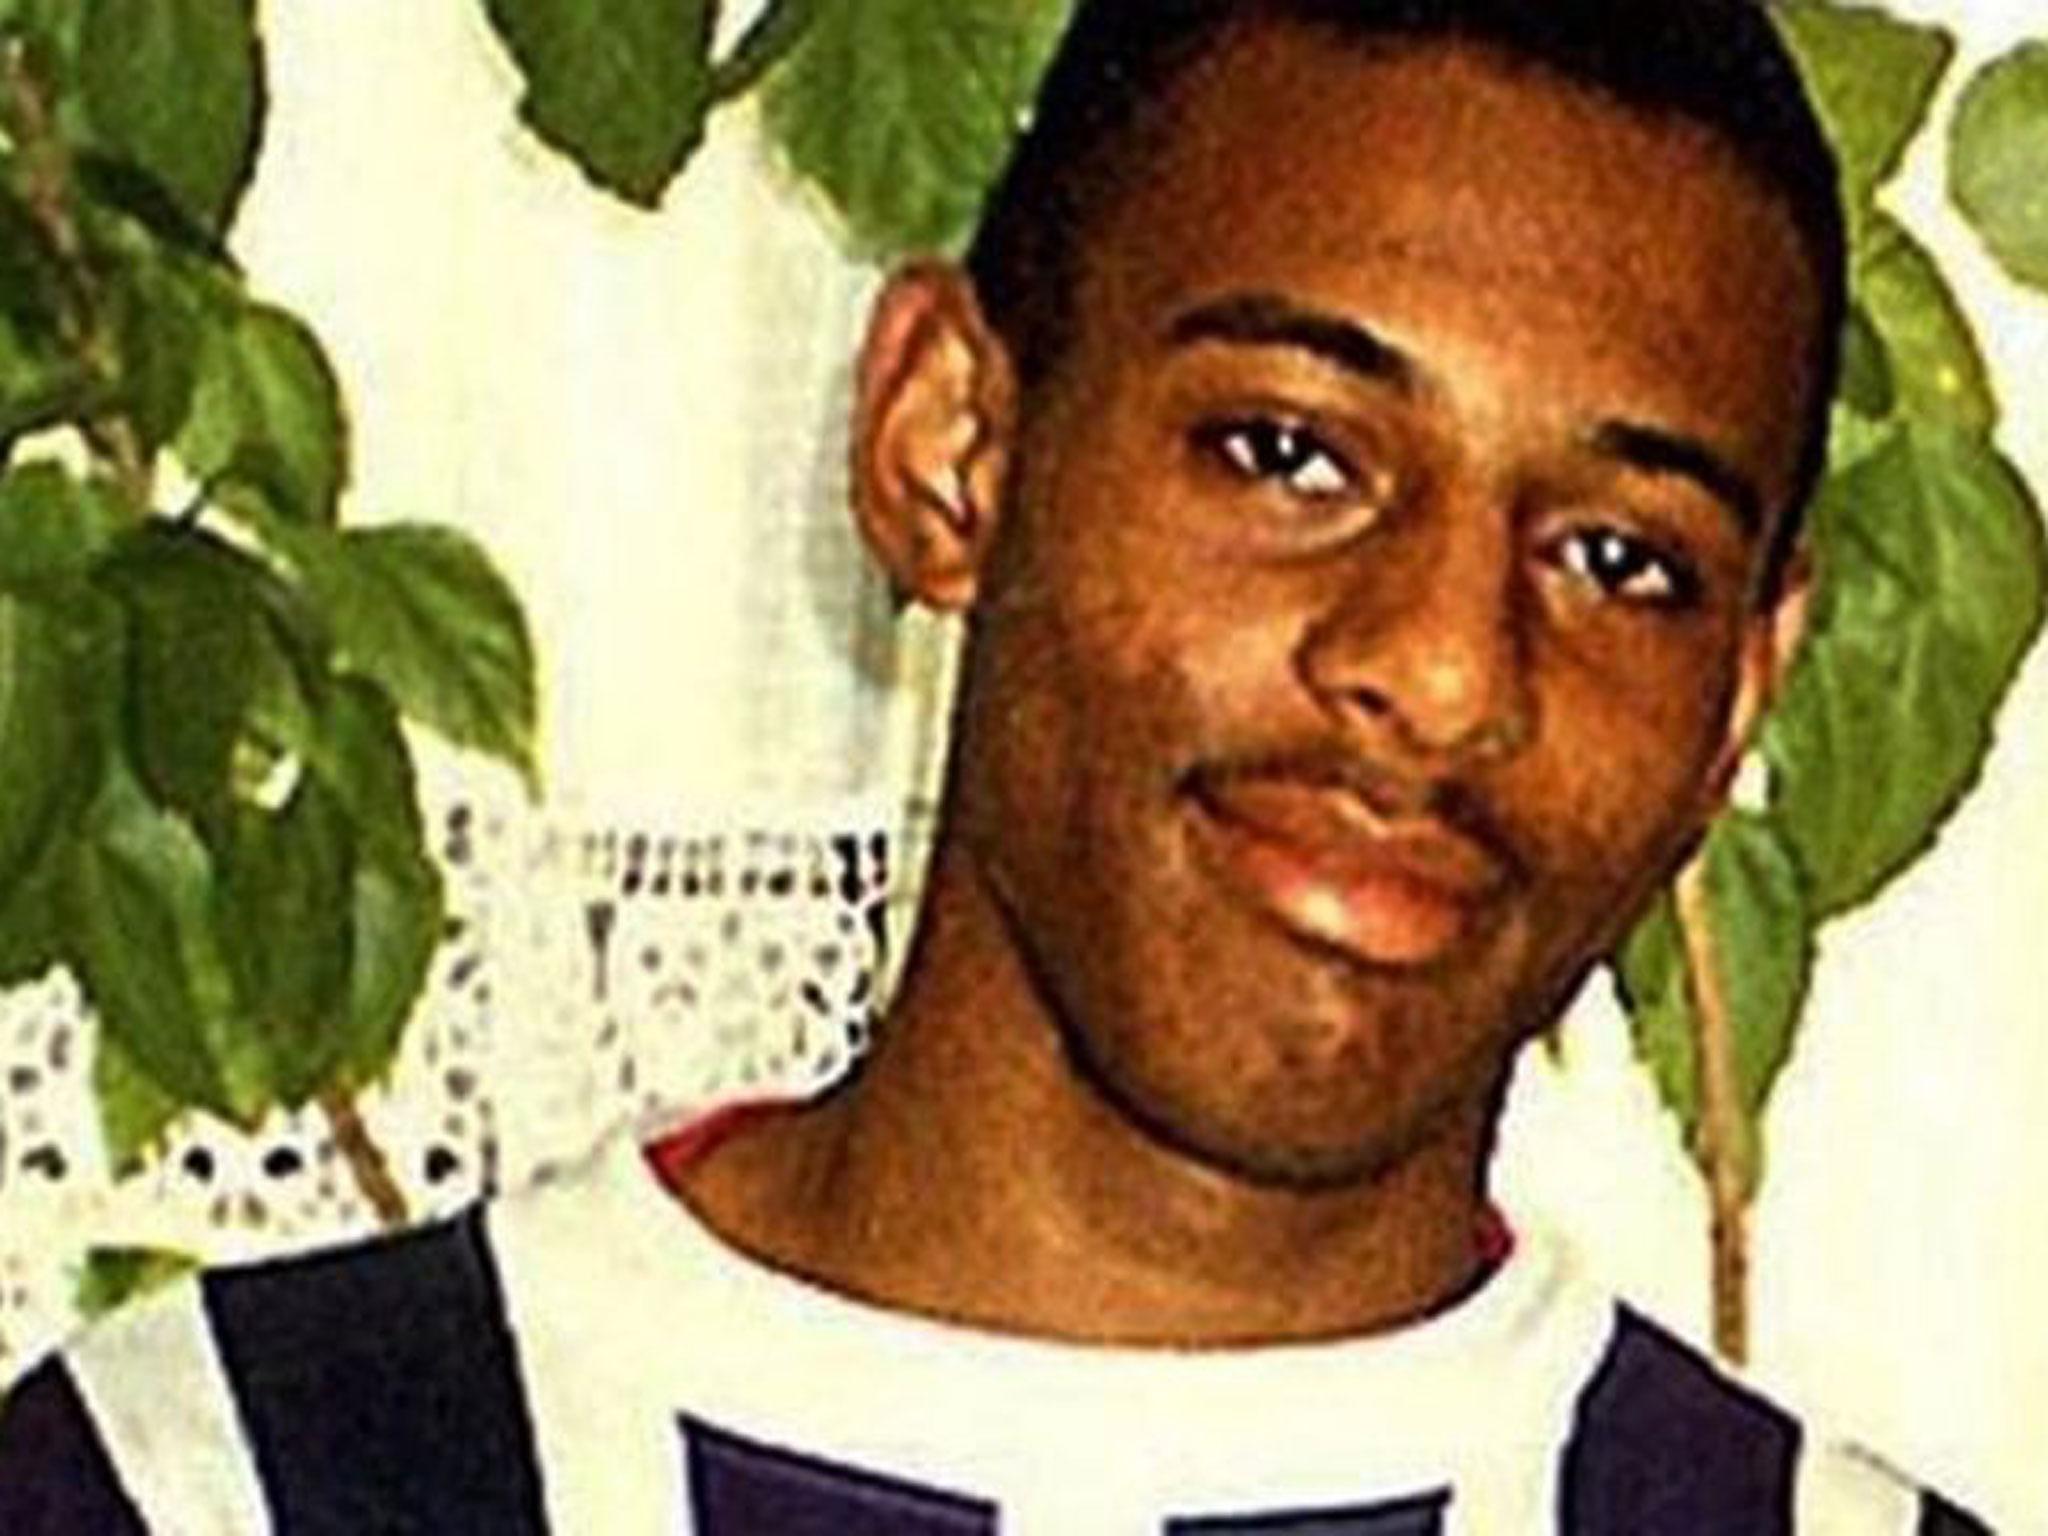 Stephen Lawrence was stabbed to death at a bus stop in south-east London in 1993